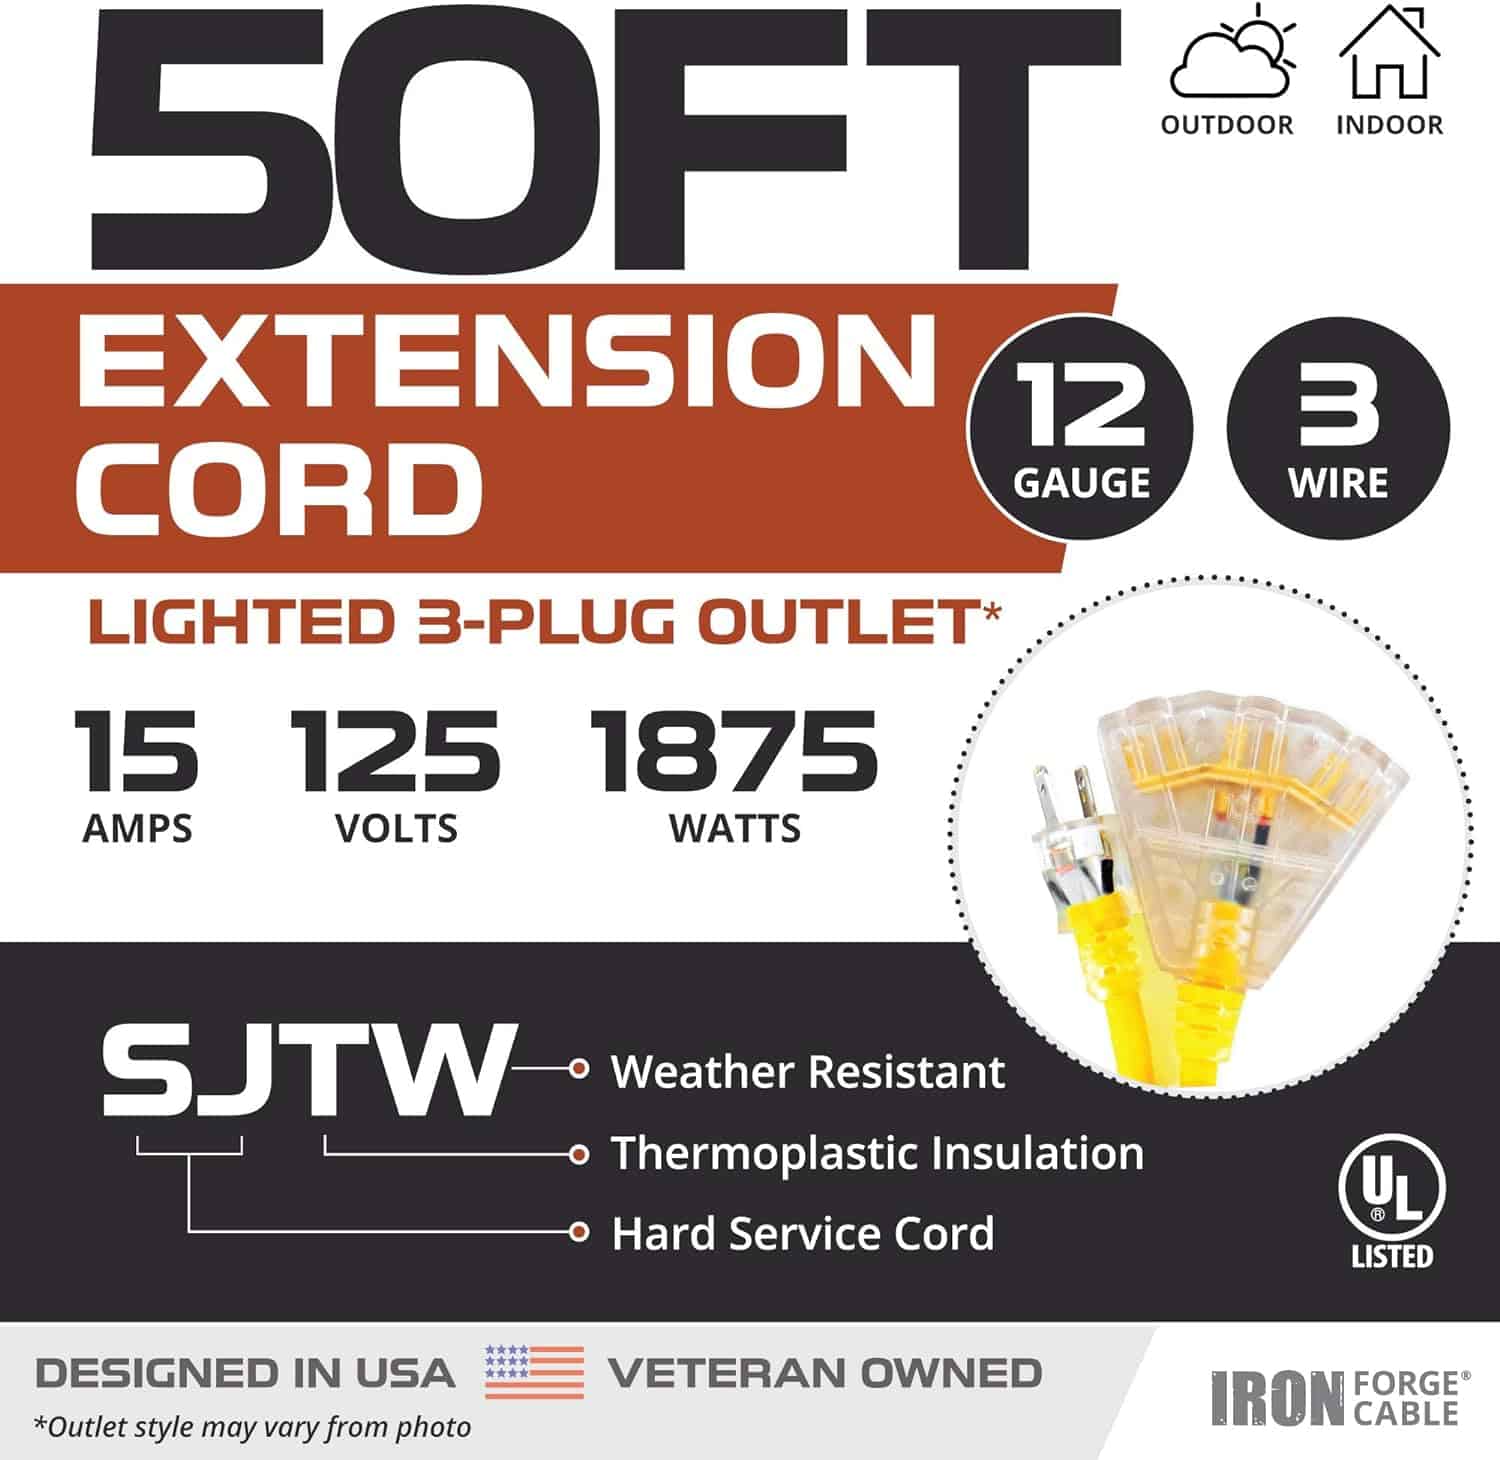 Iron Forge Cable 50 Foot Lighted Outdoor Extension Cord with 3 Electrical Power Outlets – 12 3 SJTW Heavy Duty Yellow Extension Cable with 3 Prong Grounded Plug for Safety 15 AMP 2